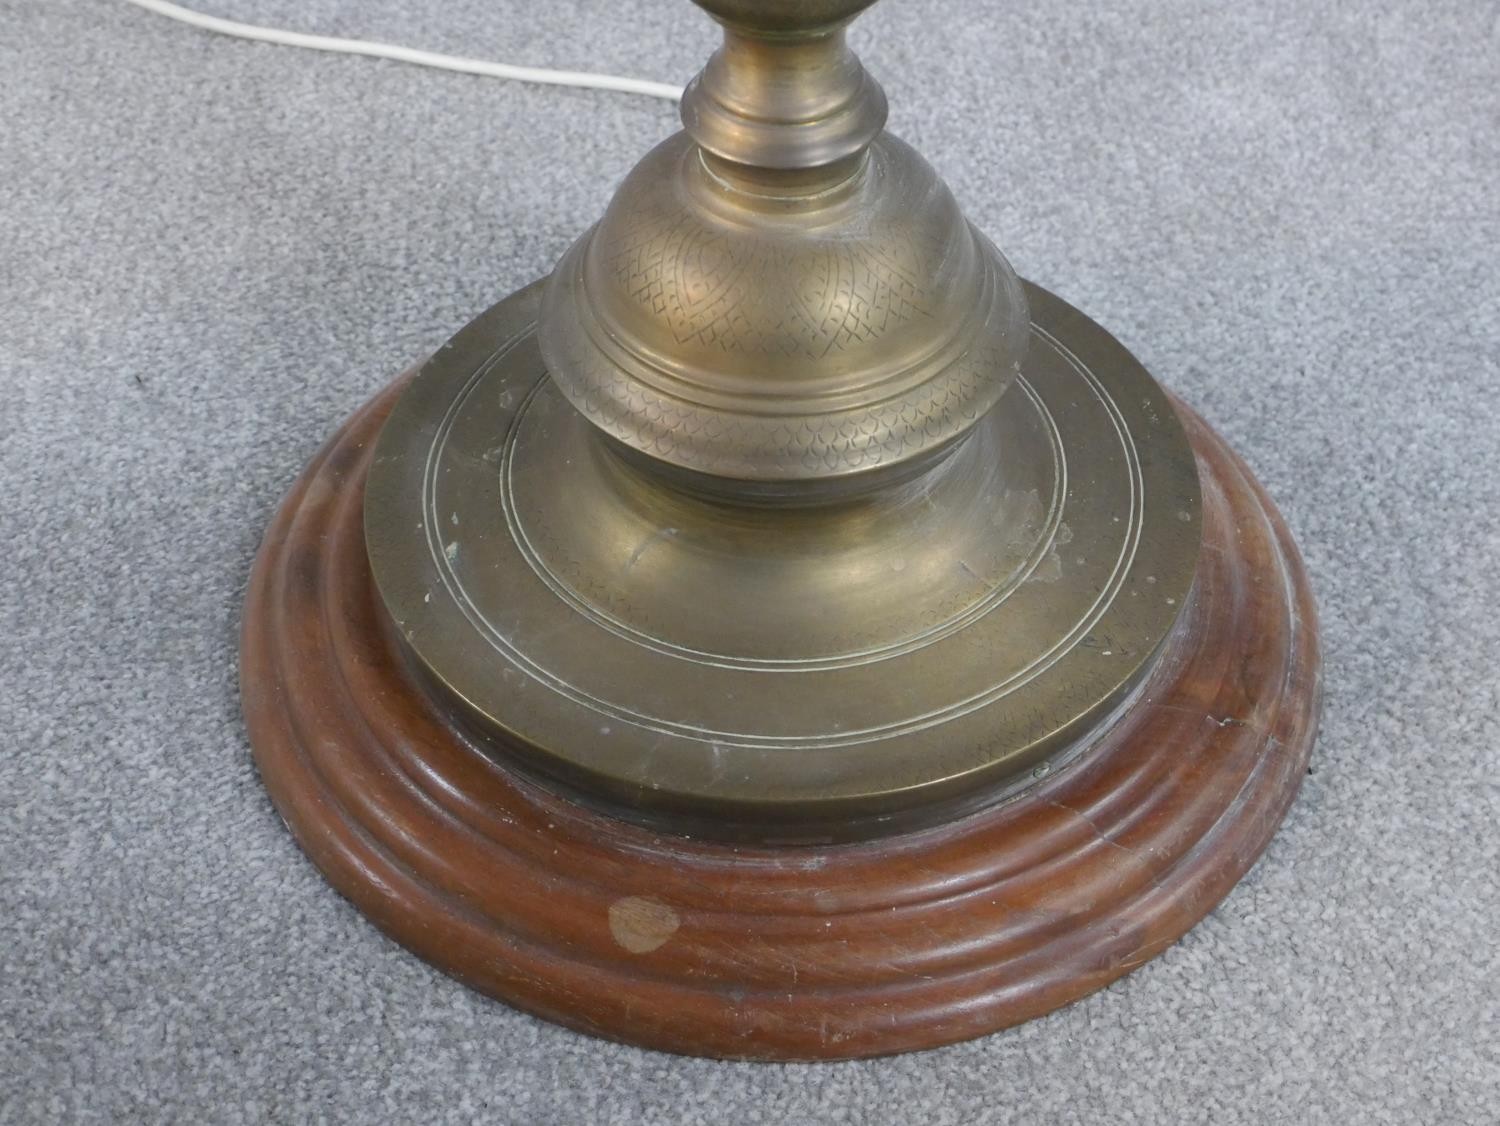 A 20th century turned brass standard lamp, on a circular base with a turned wood foot. H.164cm - Image 6 of 7